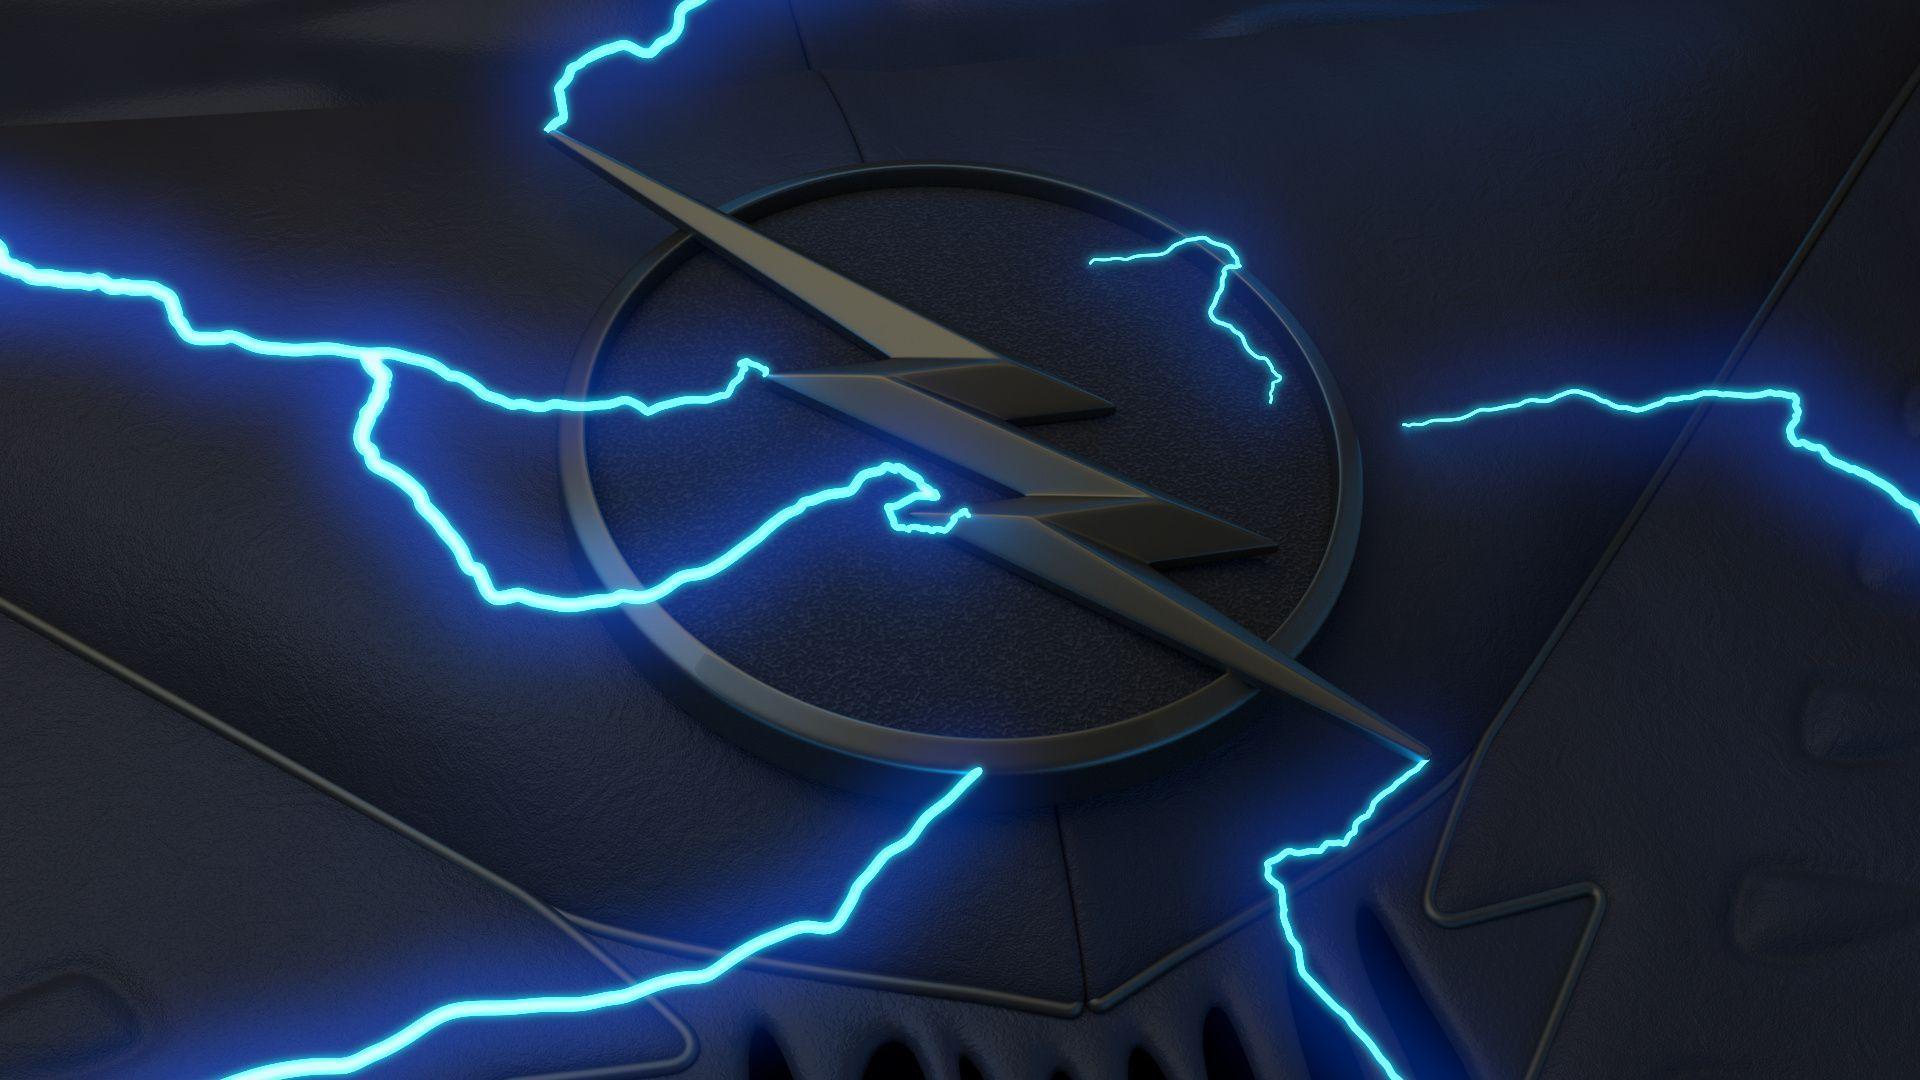 The Flash Zoom Wallpaper